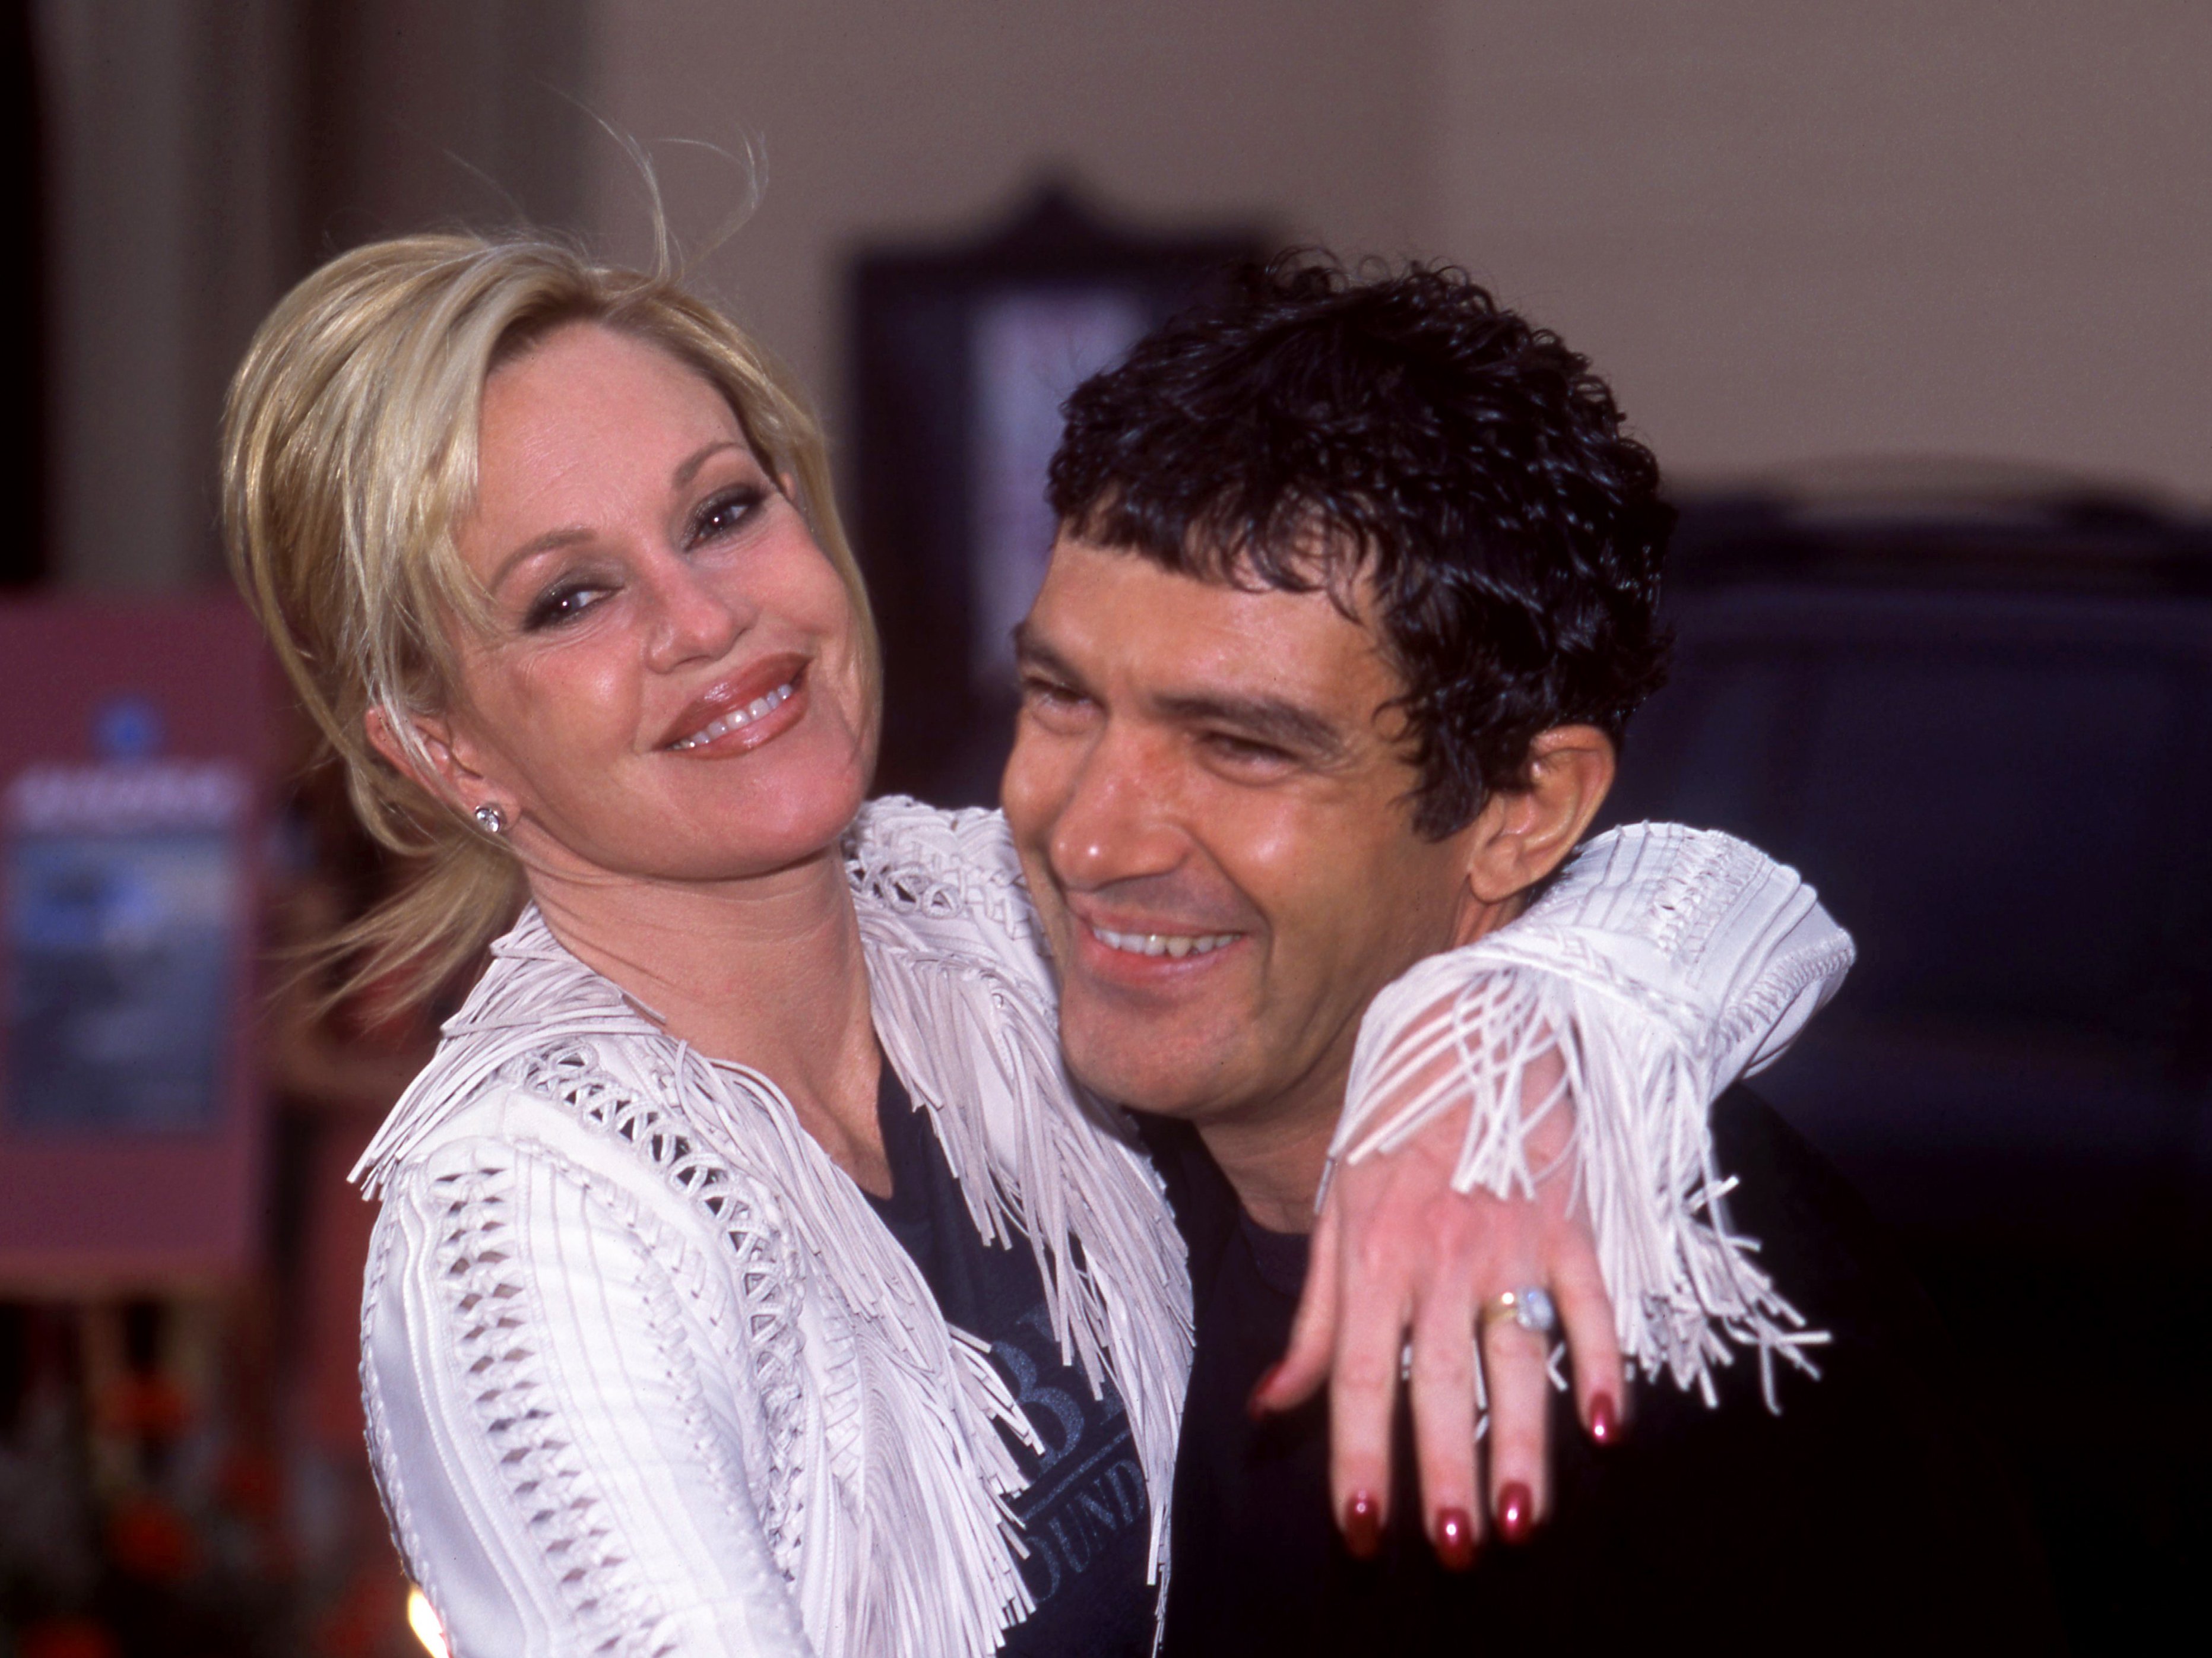  Melanie Griffith and Antonio Banderas, pose for a portrait before the 2002 American Latino Media Arts Awards on May 18, 2002 in Los Angeles, California | Source: Getty Images